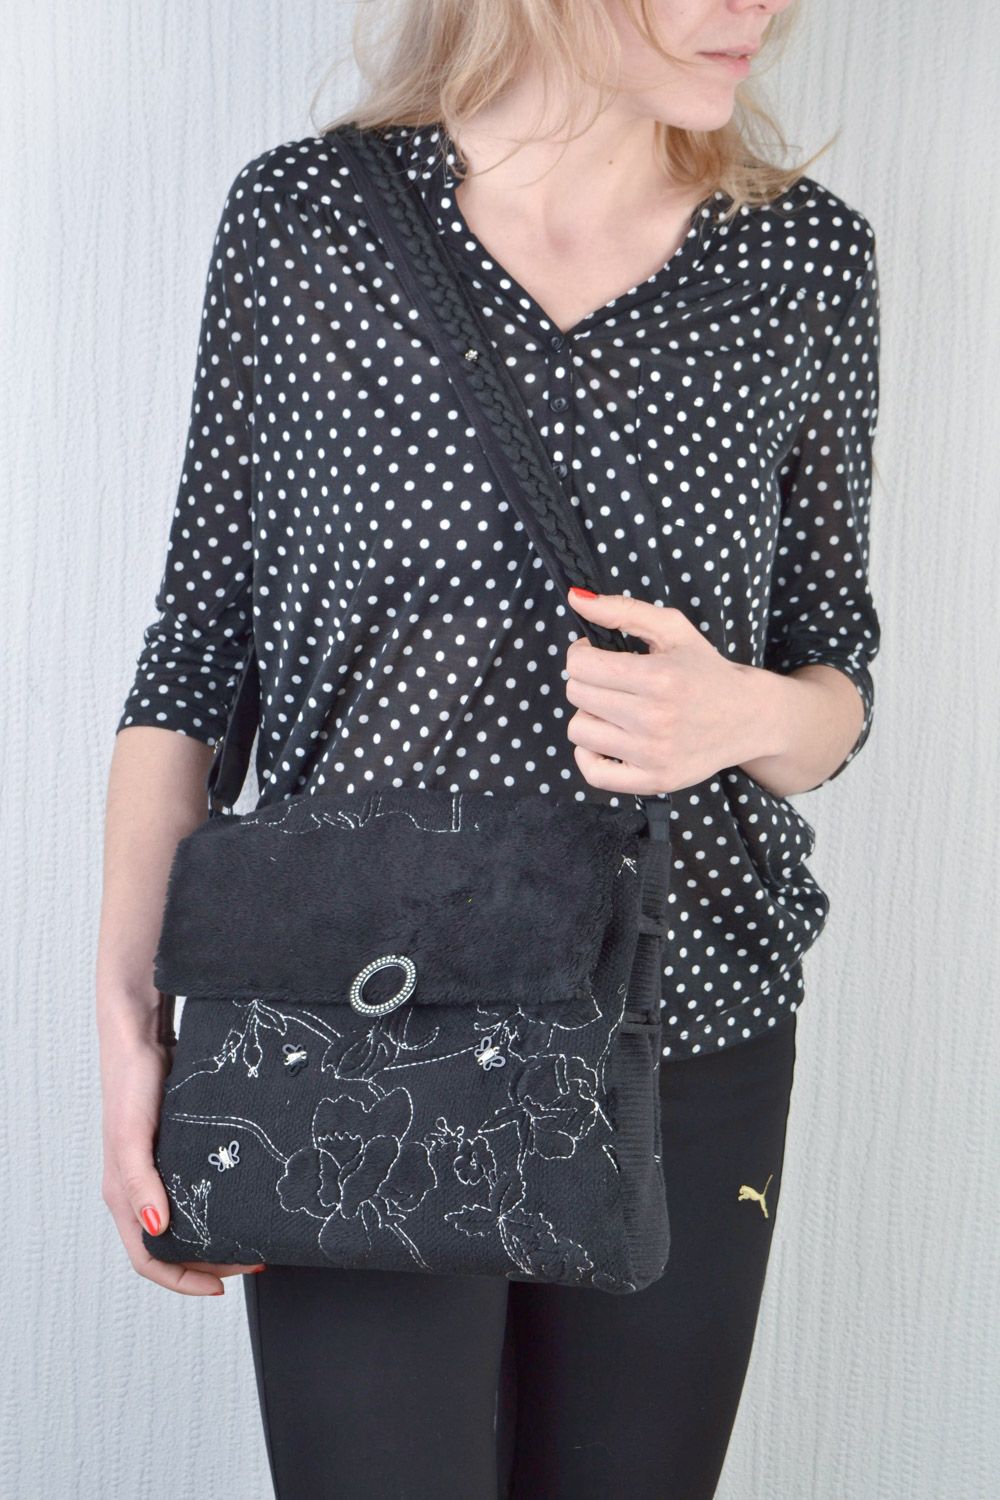 Handmade black square bag on a long handle made of fabric for stylish women photo 1